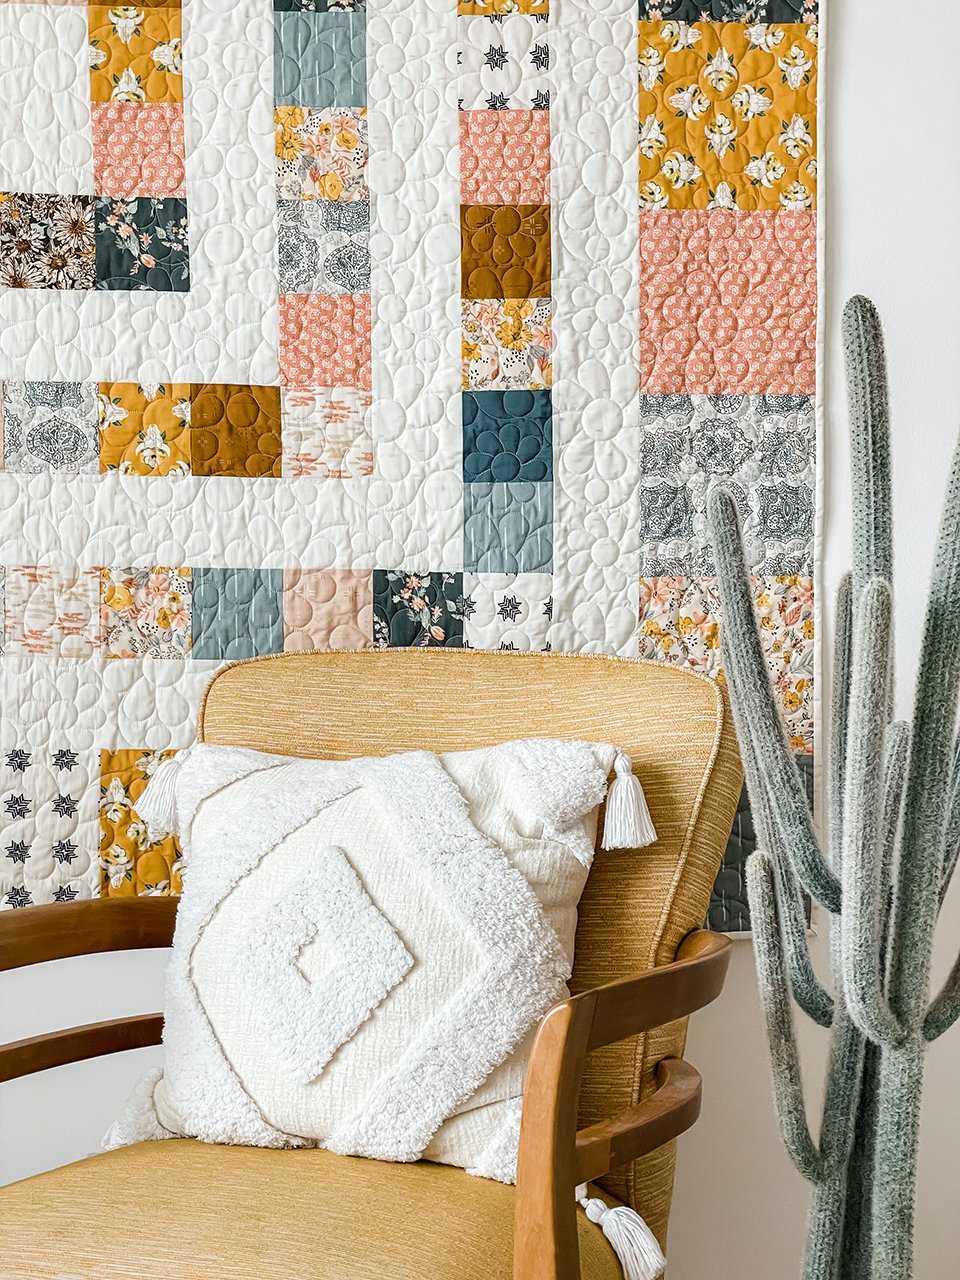 Roundabout cover quilt from Sharon Holland Designs